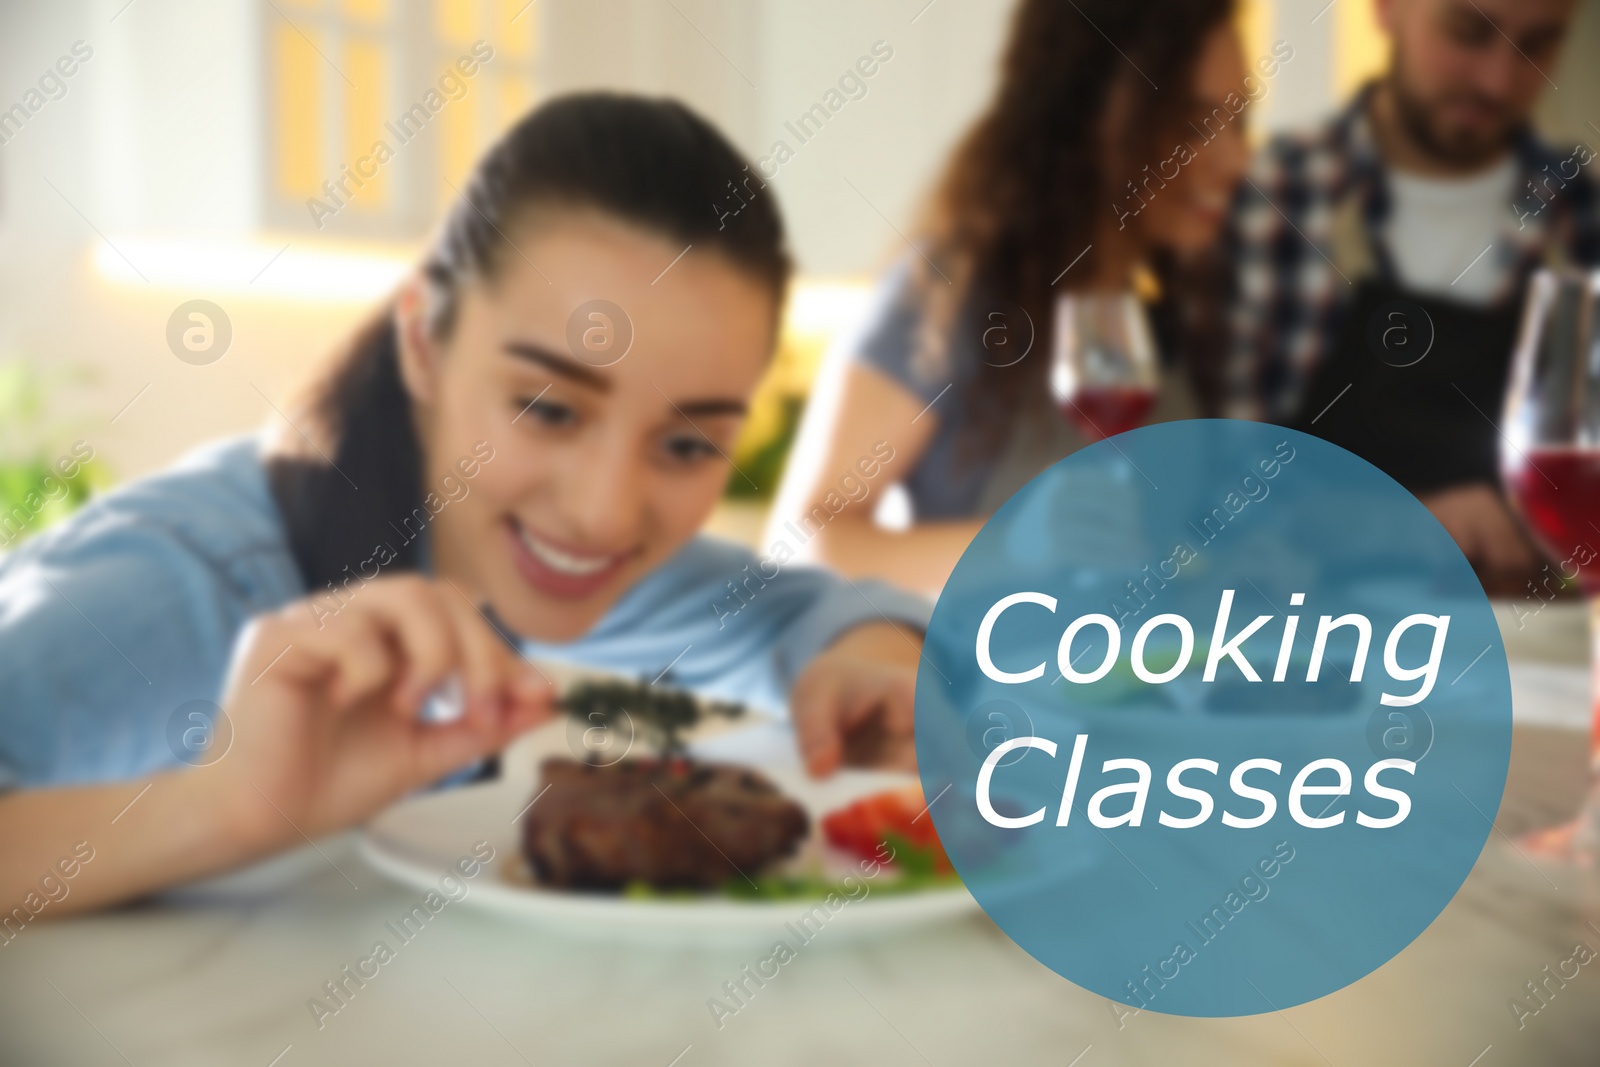 Image of Cooking classes. Blurred view of young woman serving food in kitchen